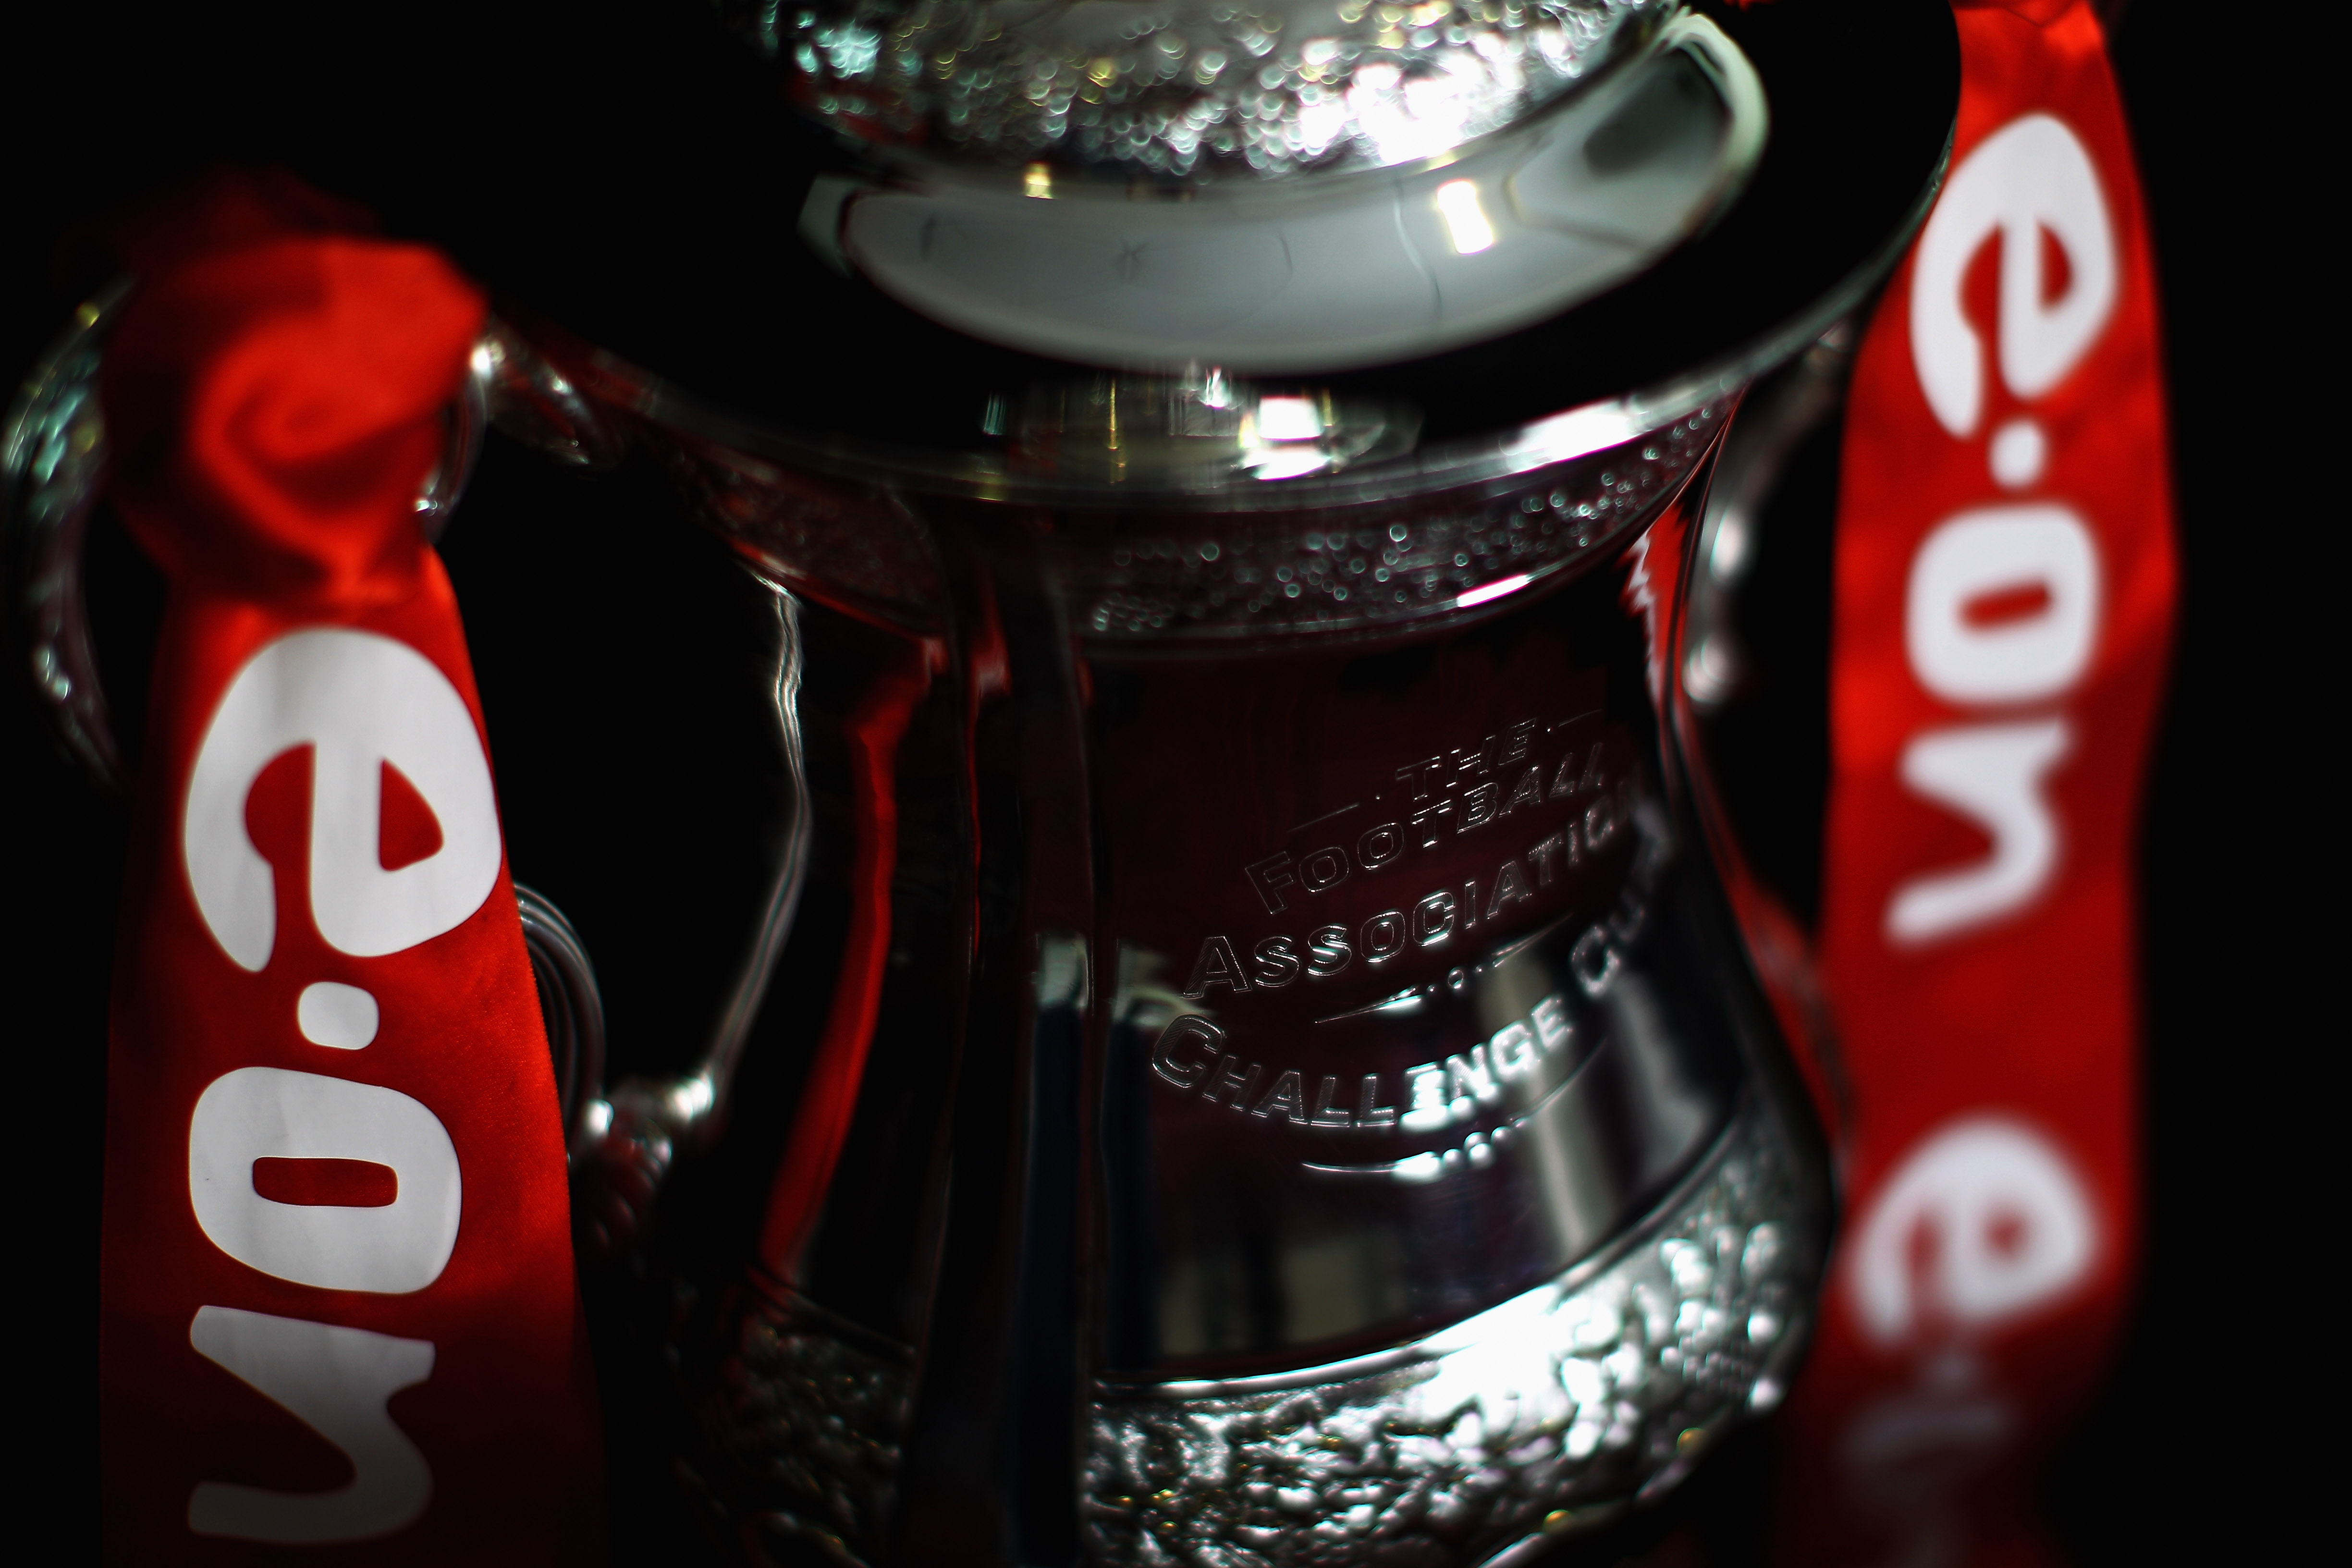 LONDON, ENGLAND - FEBRUARY 16:  A detailed view of the FA Cup sponsored by Eon at the Leyton Orient FA Cup Media Day at Matchroom Stadium on February 16, 2011 in London, England.  (Photo by Dean Mouhtaropoulos/Getty Images)